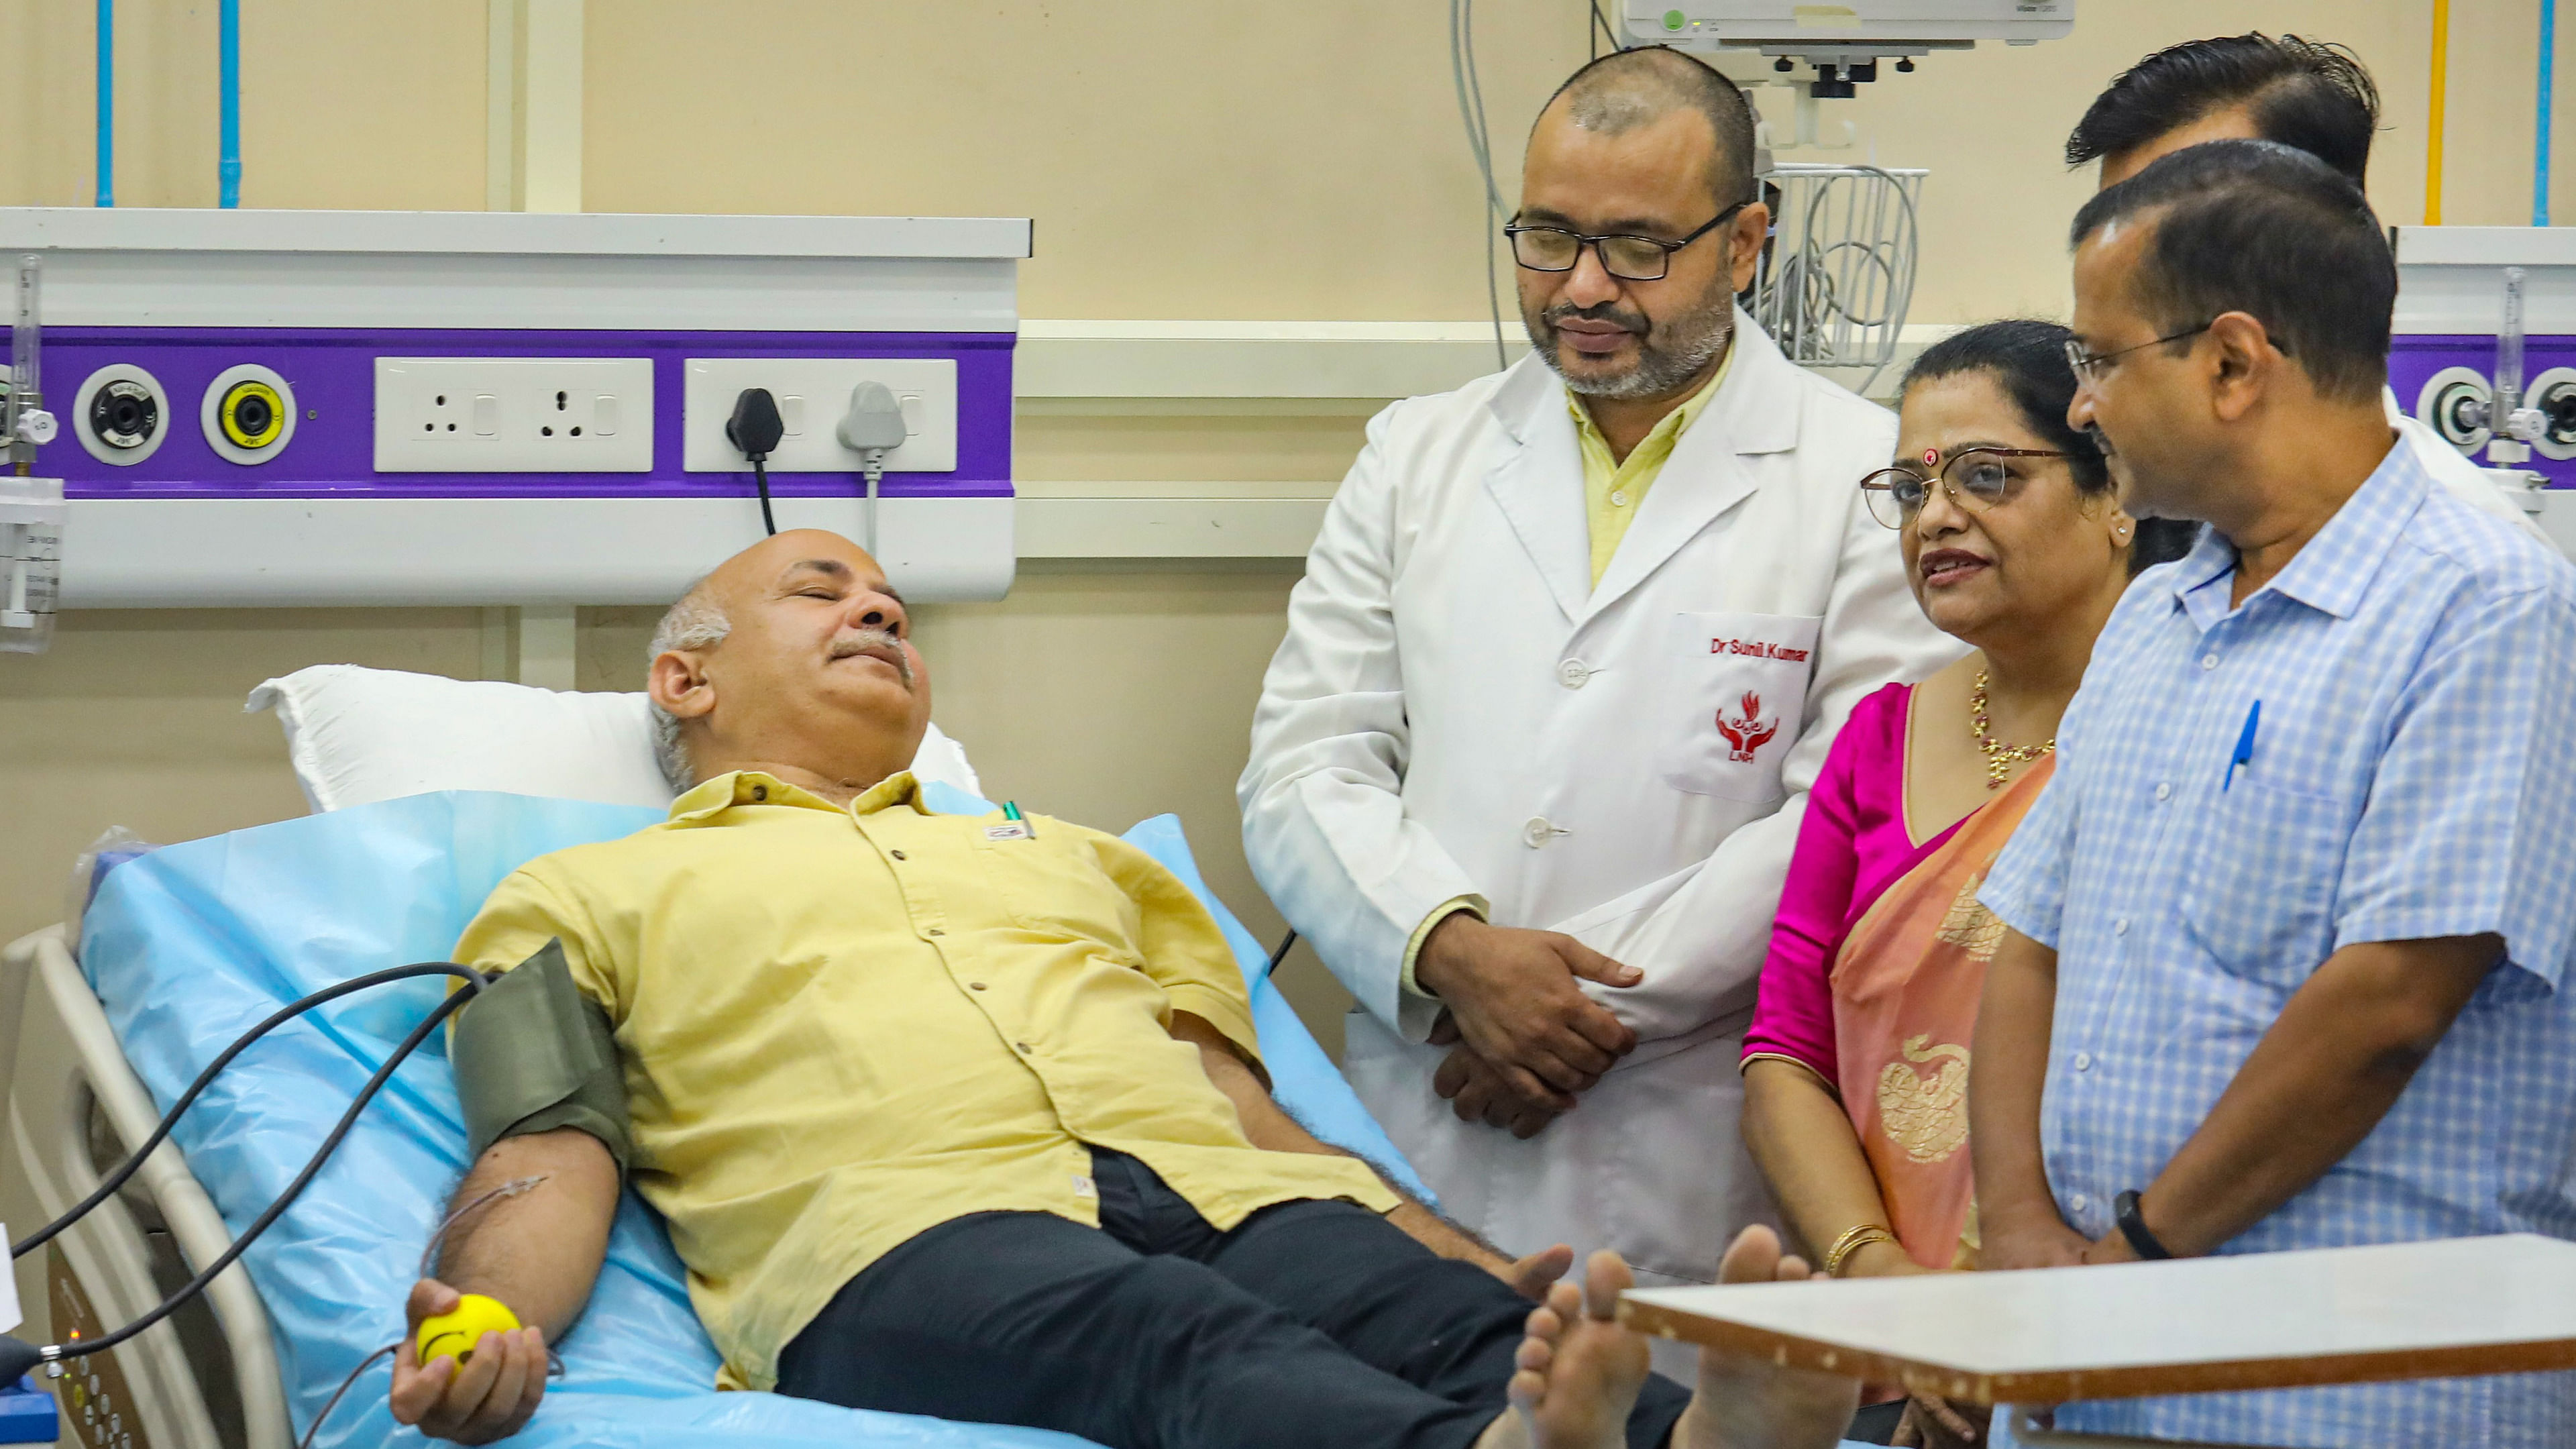 Deputy Chief Minister Manish Sisodia donated blood on the occasion at Maulana Azad Medical College. Credit: PTI Photo